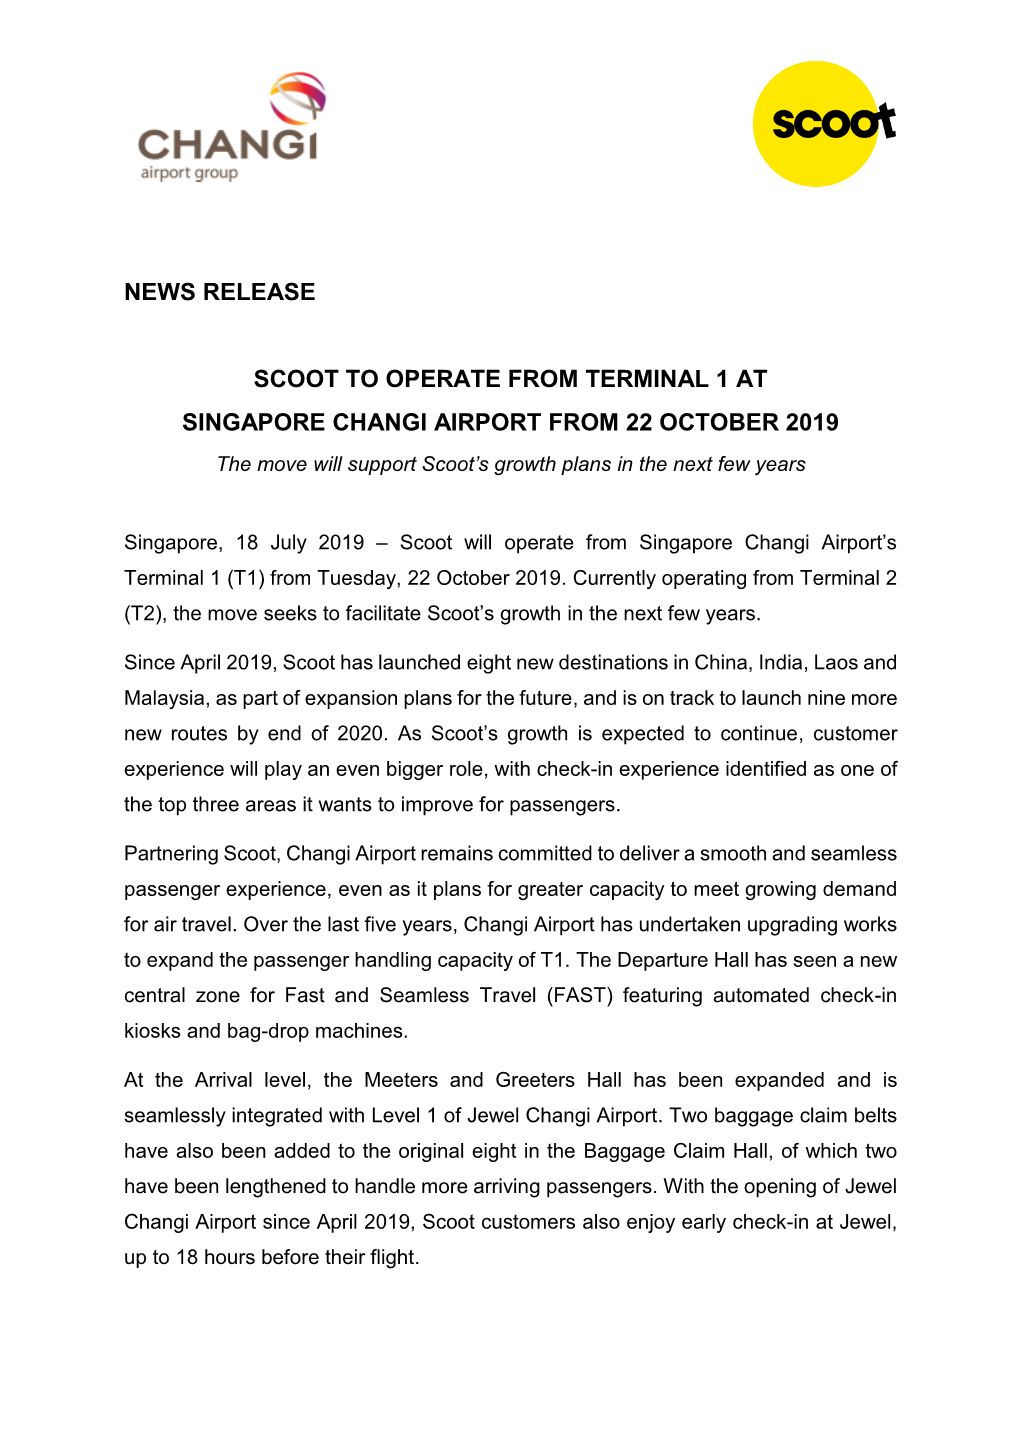 News Release Scoot to Operate from Terminal 1 at Singapore Changi Airport from 22 October 2019